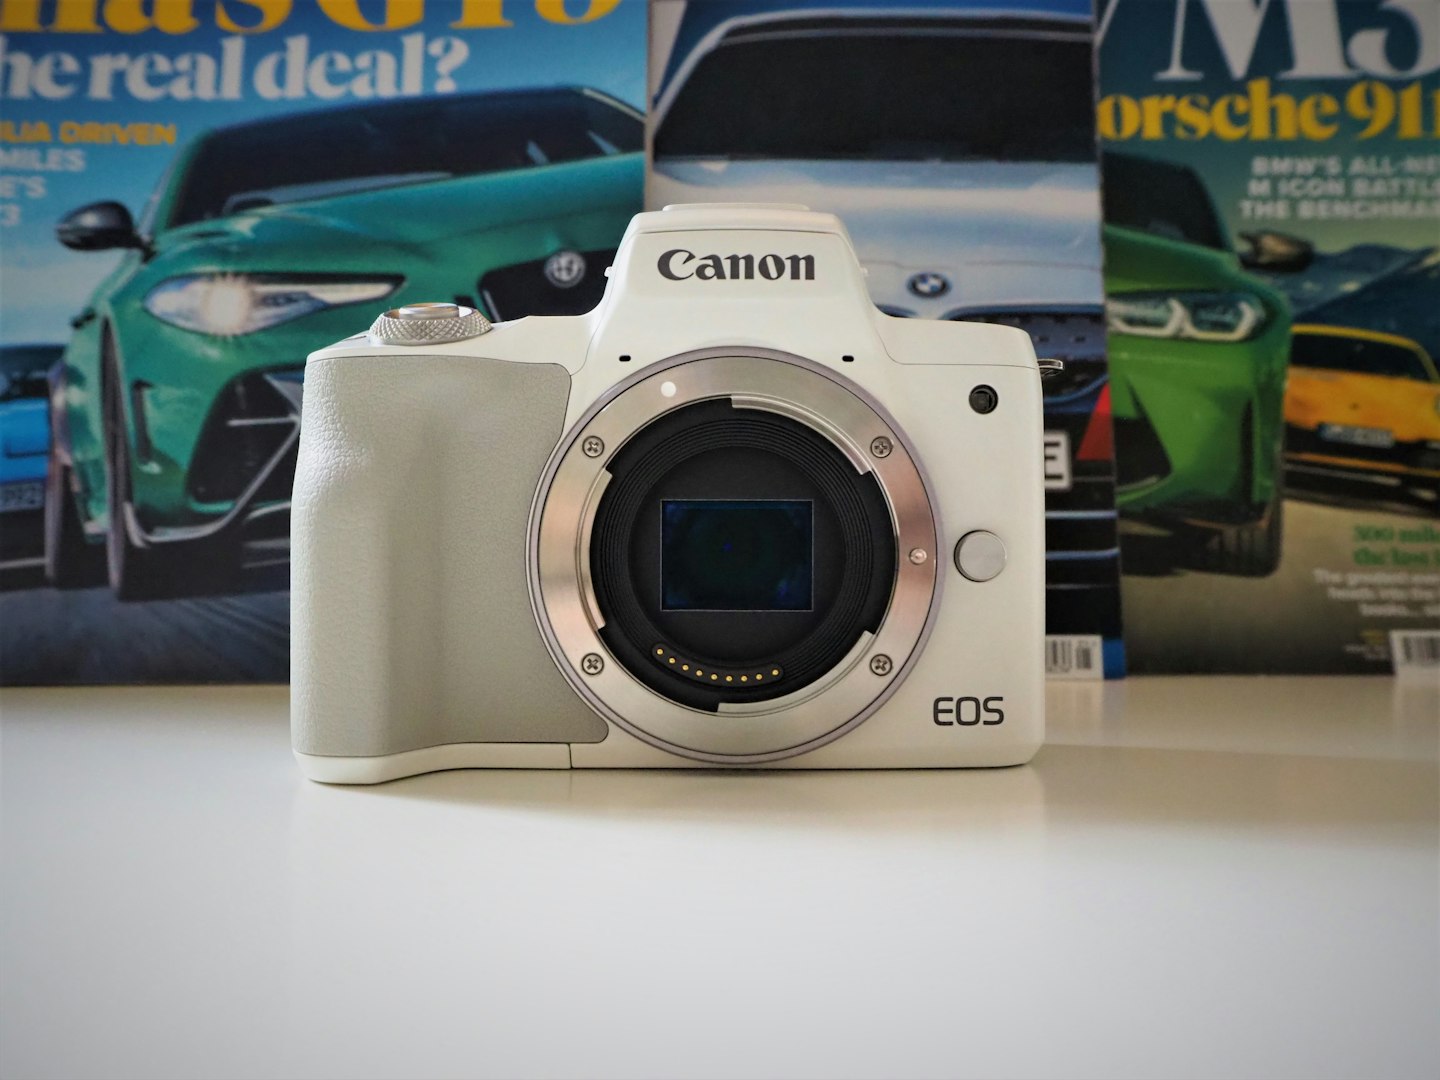 CAR's review of the Canon EOS M50 MkII